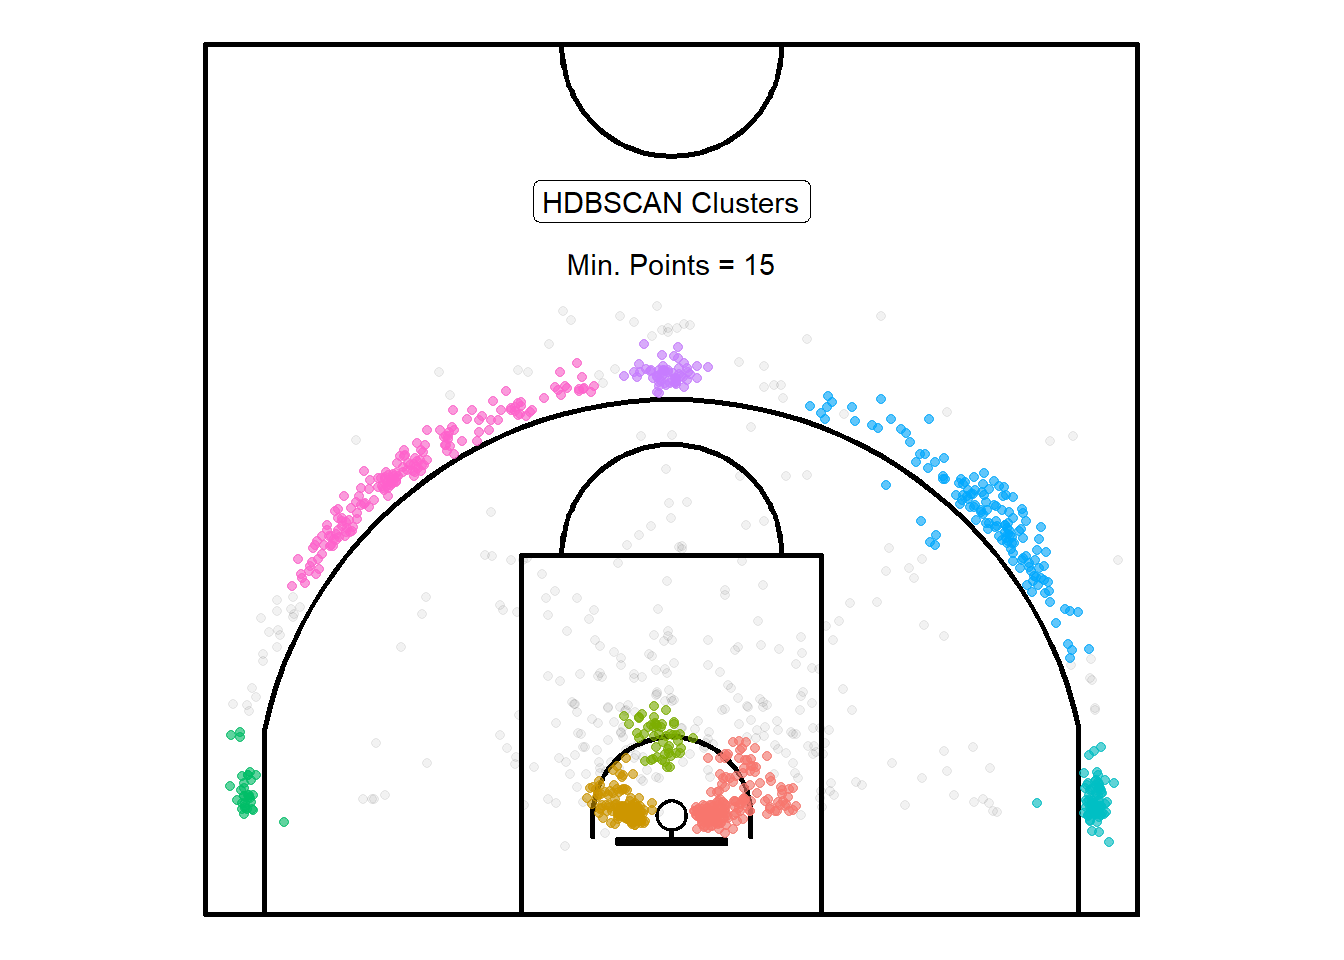 Points leaking past the three-point line